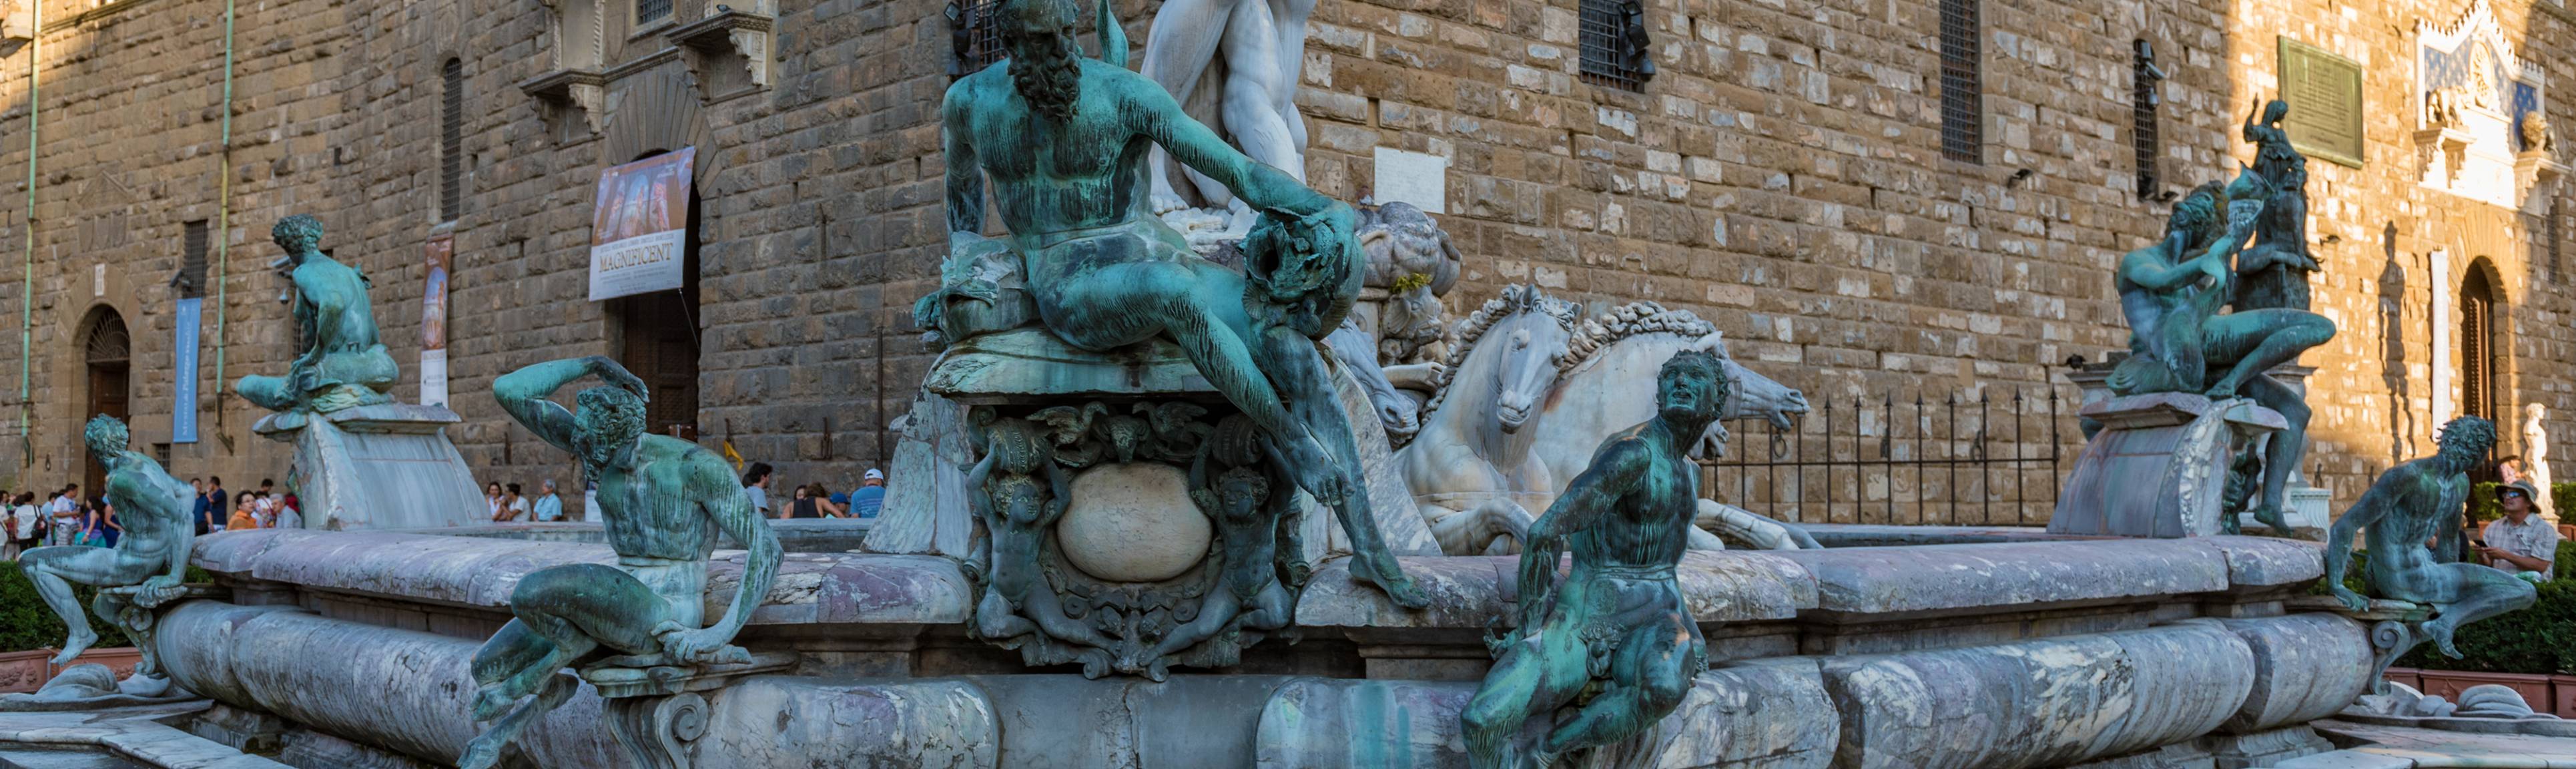 Statues decorating the front of Neptune's Fountain in Florence, Italy